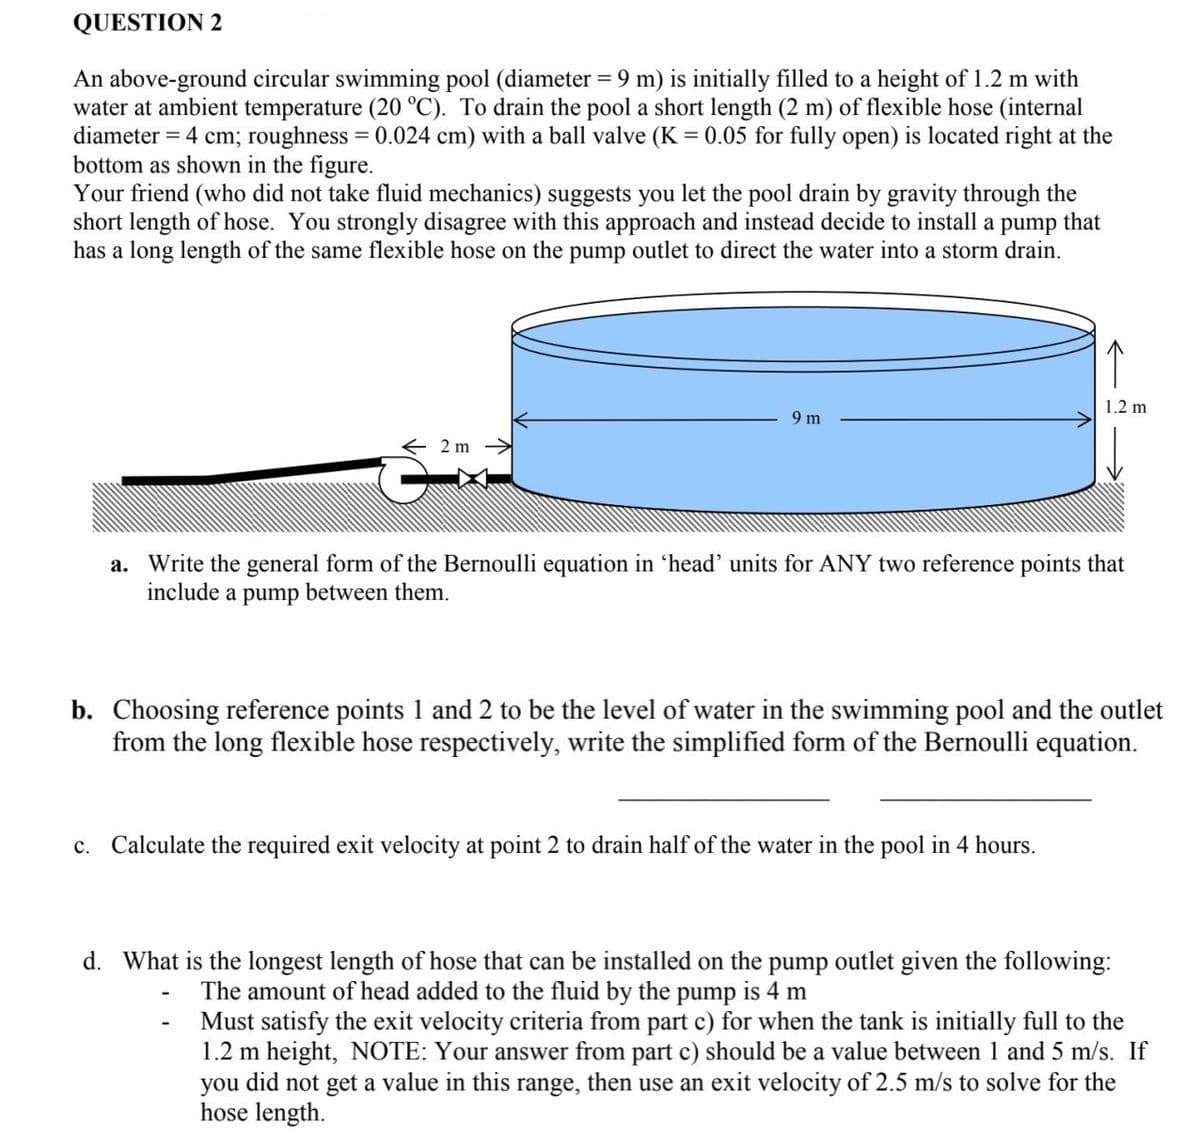 QUESTION 2
An above-ground circular swimming pool (diameter = 9 m) is initially filled to a height of 1.2 m with
water at ambient temperature (20 °C). To drain the pool a short length (2 m) of flexible hose (internal
diameter = 4 cm; roughness = 0.024 cm) with a ball valve (K = 0.05 for fully open) is located right at the
bottom as shown in the figure.
Your friend (who did not take fluid mechanics) suggests you let the pool drain by gravity through the
short length of hose. You strongly disagree with this approach and instead decide to install a pump that
has a long length of the same flexible hose on the pump outlet to direct the water into a storm drain.
←2m
9 m
↑
1.2 m
a. Write the general form of the Bernoulli equation in 'head' units for ANY two reference points that
include a pump between them.
b. Choosing reference points 1 and 2 to be the level of water in the swimming pool and the outlet
from the long flexible hose respectively, write the simplified form of the Bernoulli equation.
c. Calculate the required exit velocity at point 2 to drain half of the water in the pool in 4 hours.
d. What is the longest length of hose that can be installed on the pump outlet given the following:
The amount of head added to the fluid by the pump is 4 m
Must satisfy the exit velocity criteria from part c) for when the tank is initially full to the
1.2 m height, NOTE: Your answer from part c) should be a value between 1 and 5 m/s. If
you did not get a value in this range, then use an exit velocity of 2.5 m/s to solve for the
hose length.